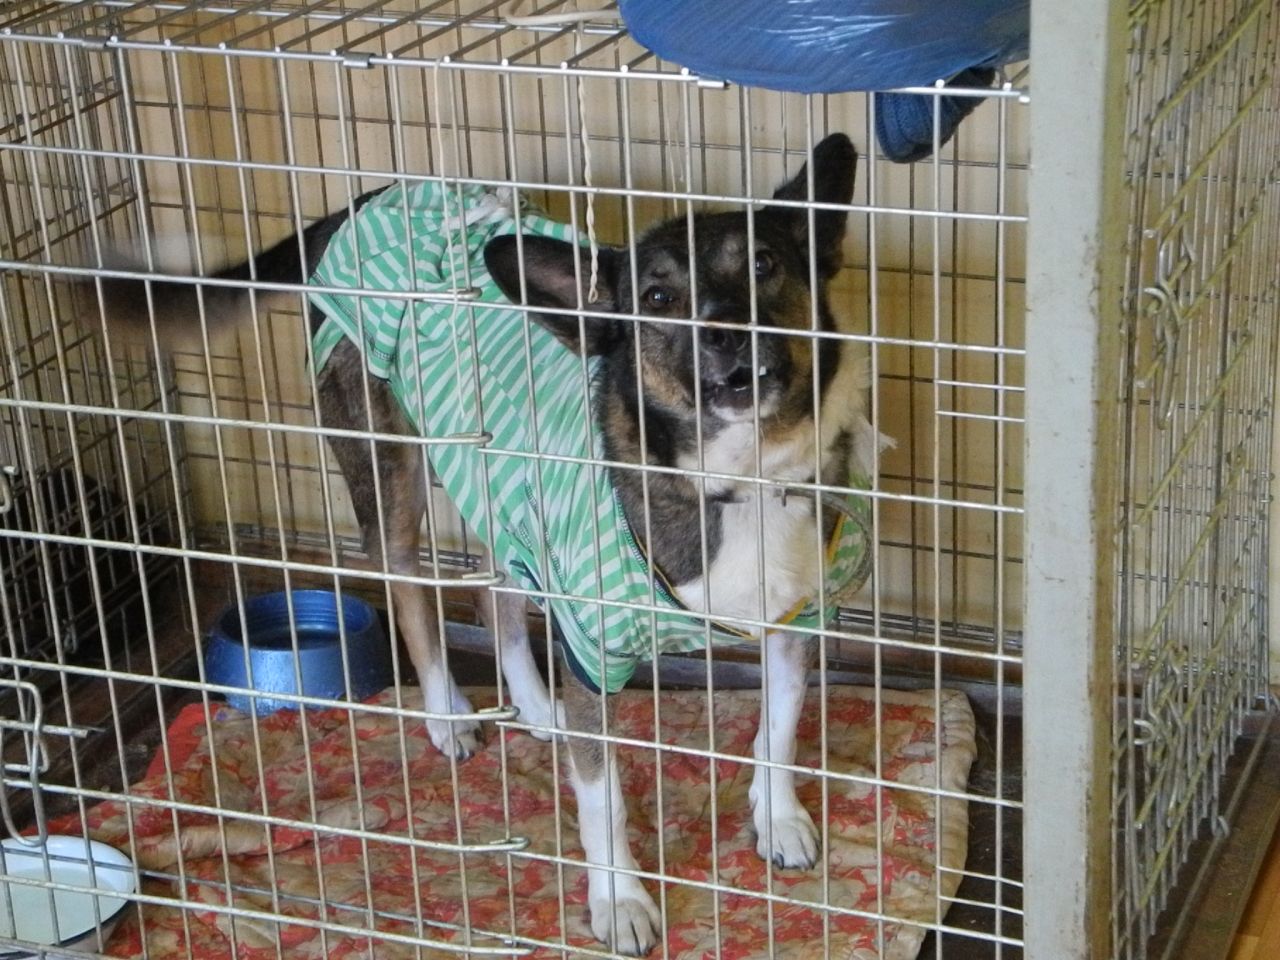 Some of the dogs were found tied up and emaciated, left behind when their owners fled; others were wounded by shrapnel -- all have been left traumatized by their experiences.